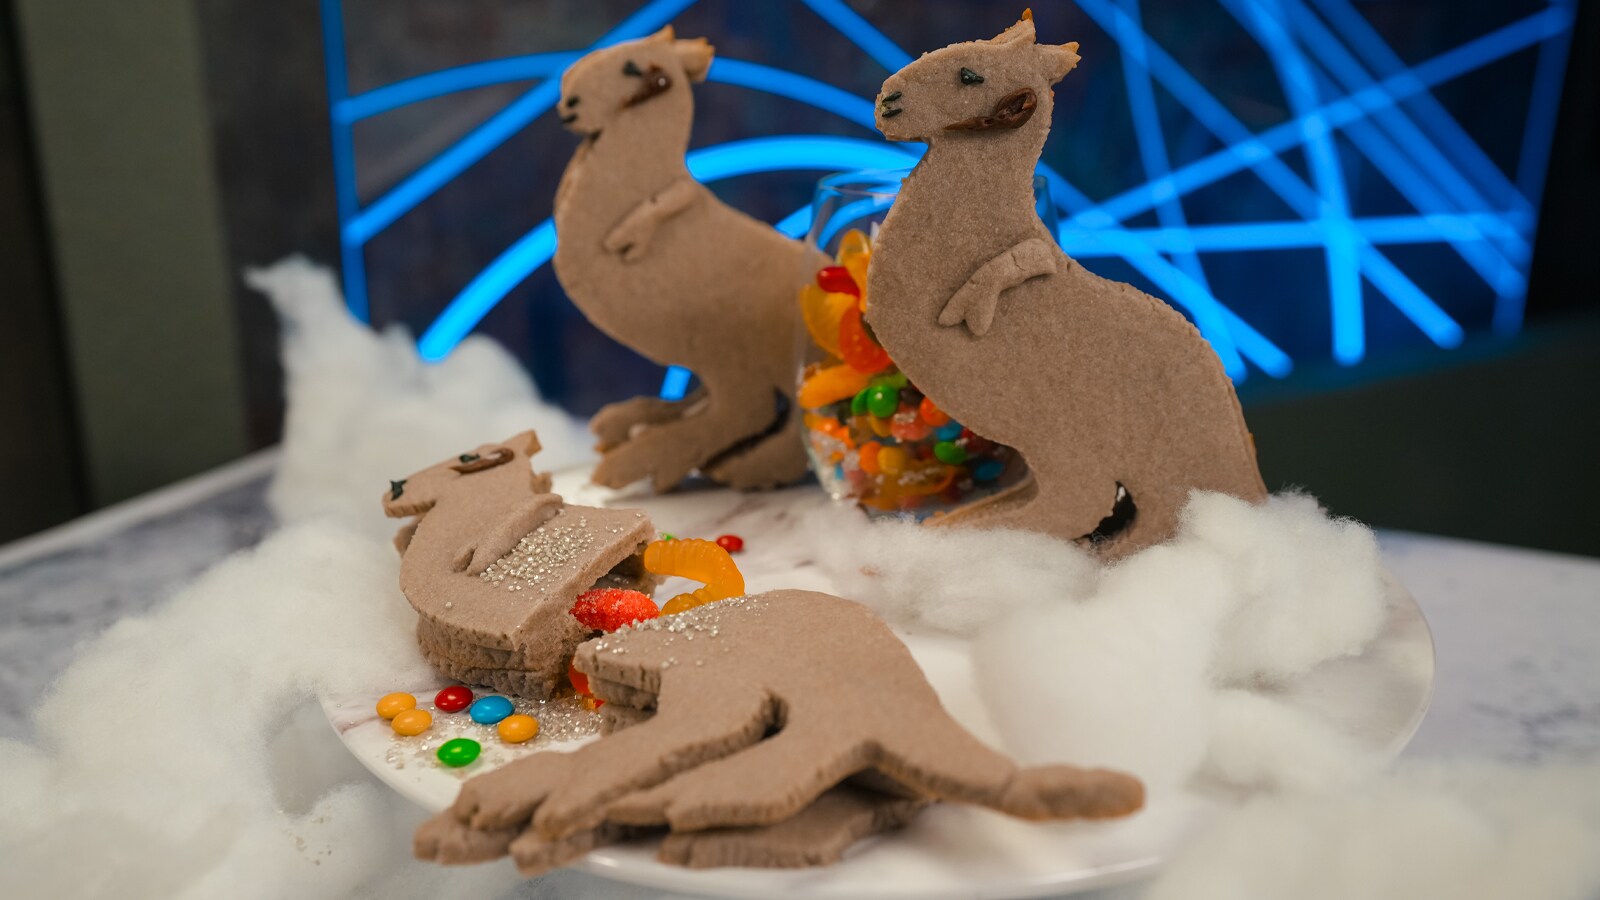 Go for a Ride with these Tauntaun Cookies